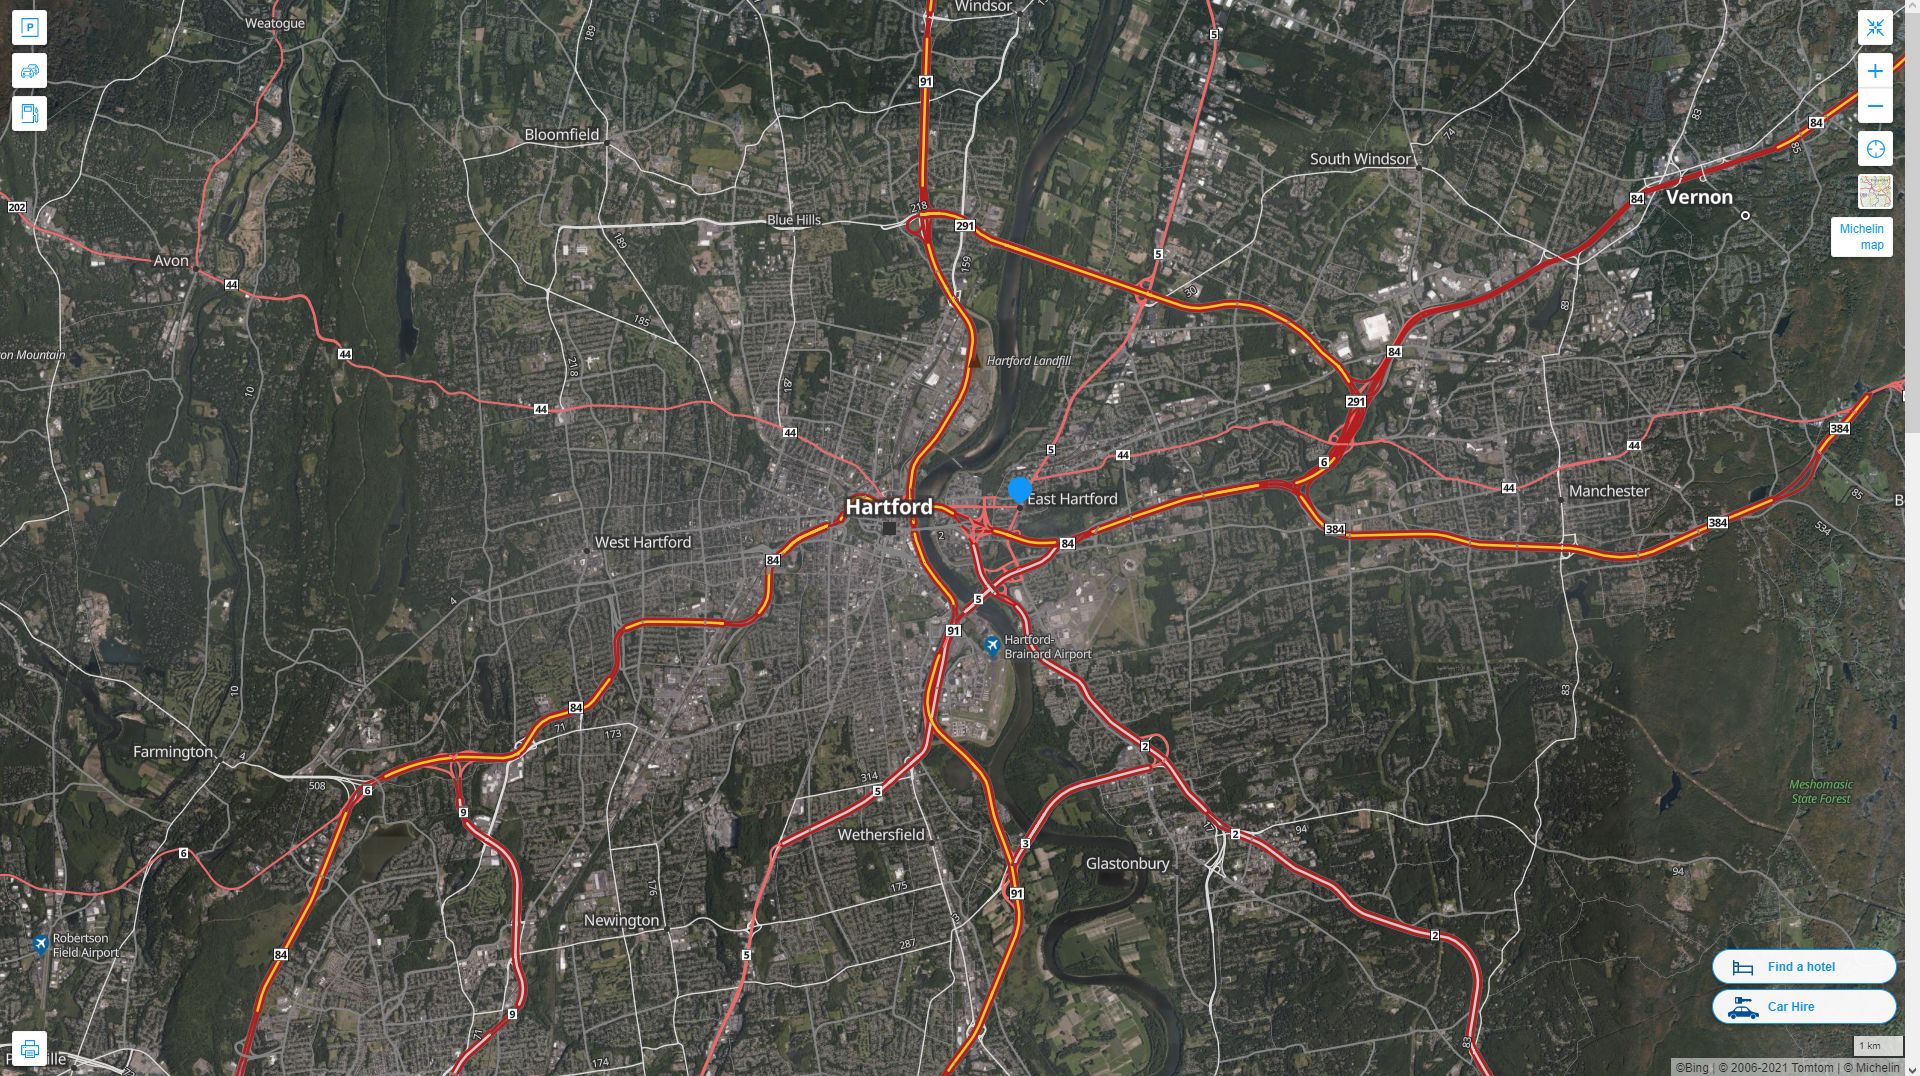 East Hartford Connecticut Highway and Road Map with Satellite View